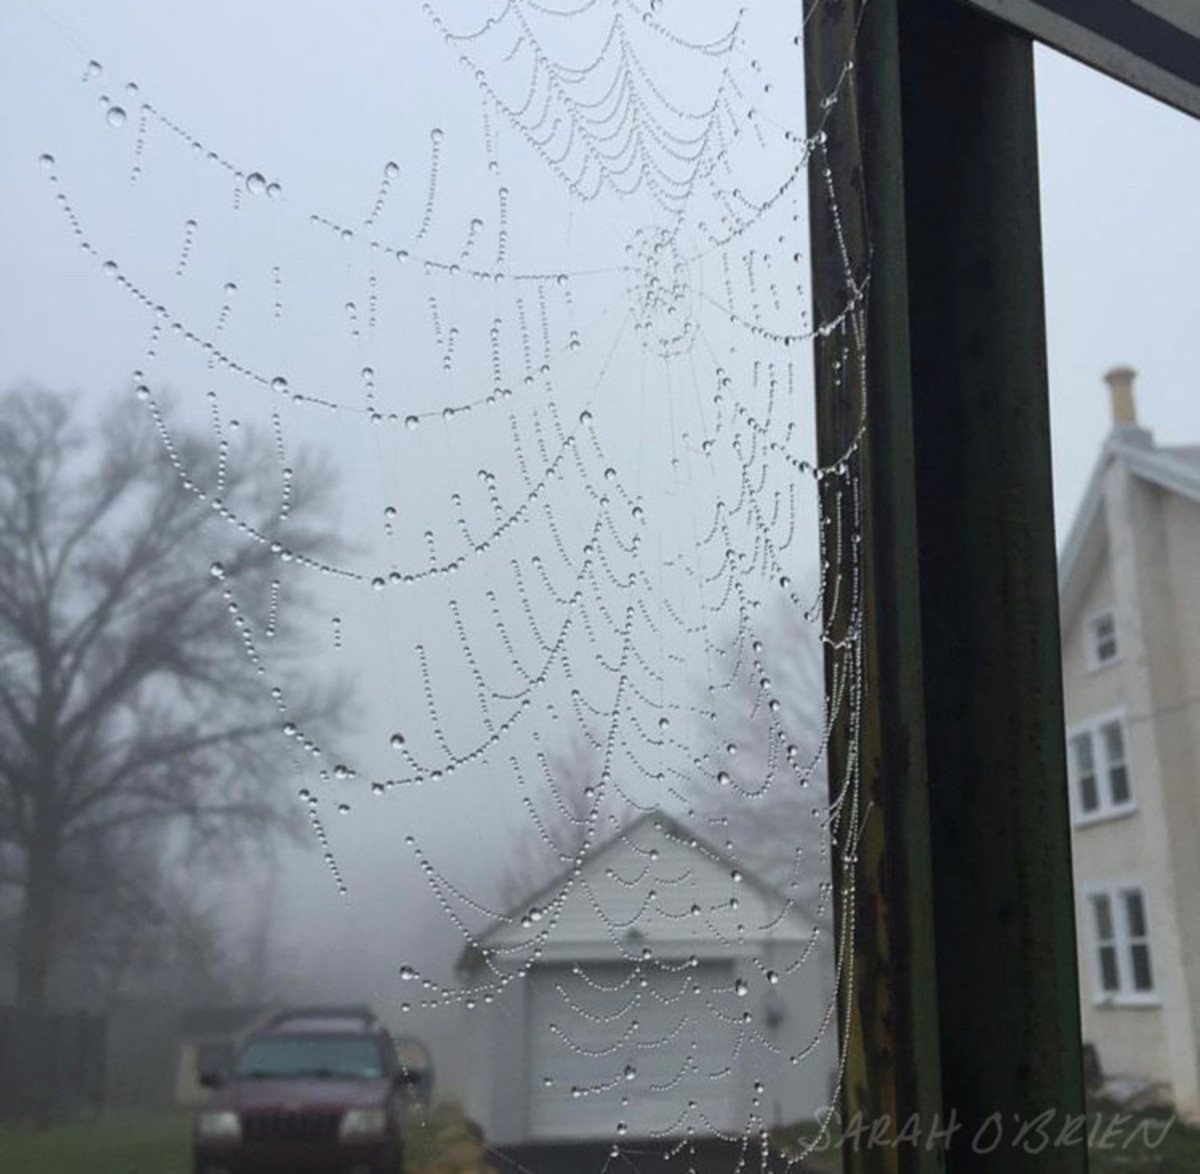 Photograph of spiderweb with dew drops, by Sarah O’Brien. 